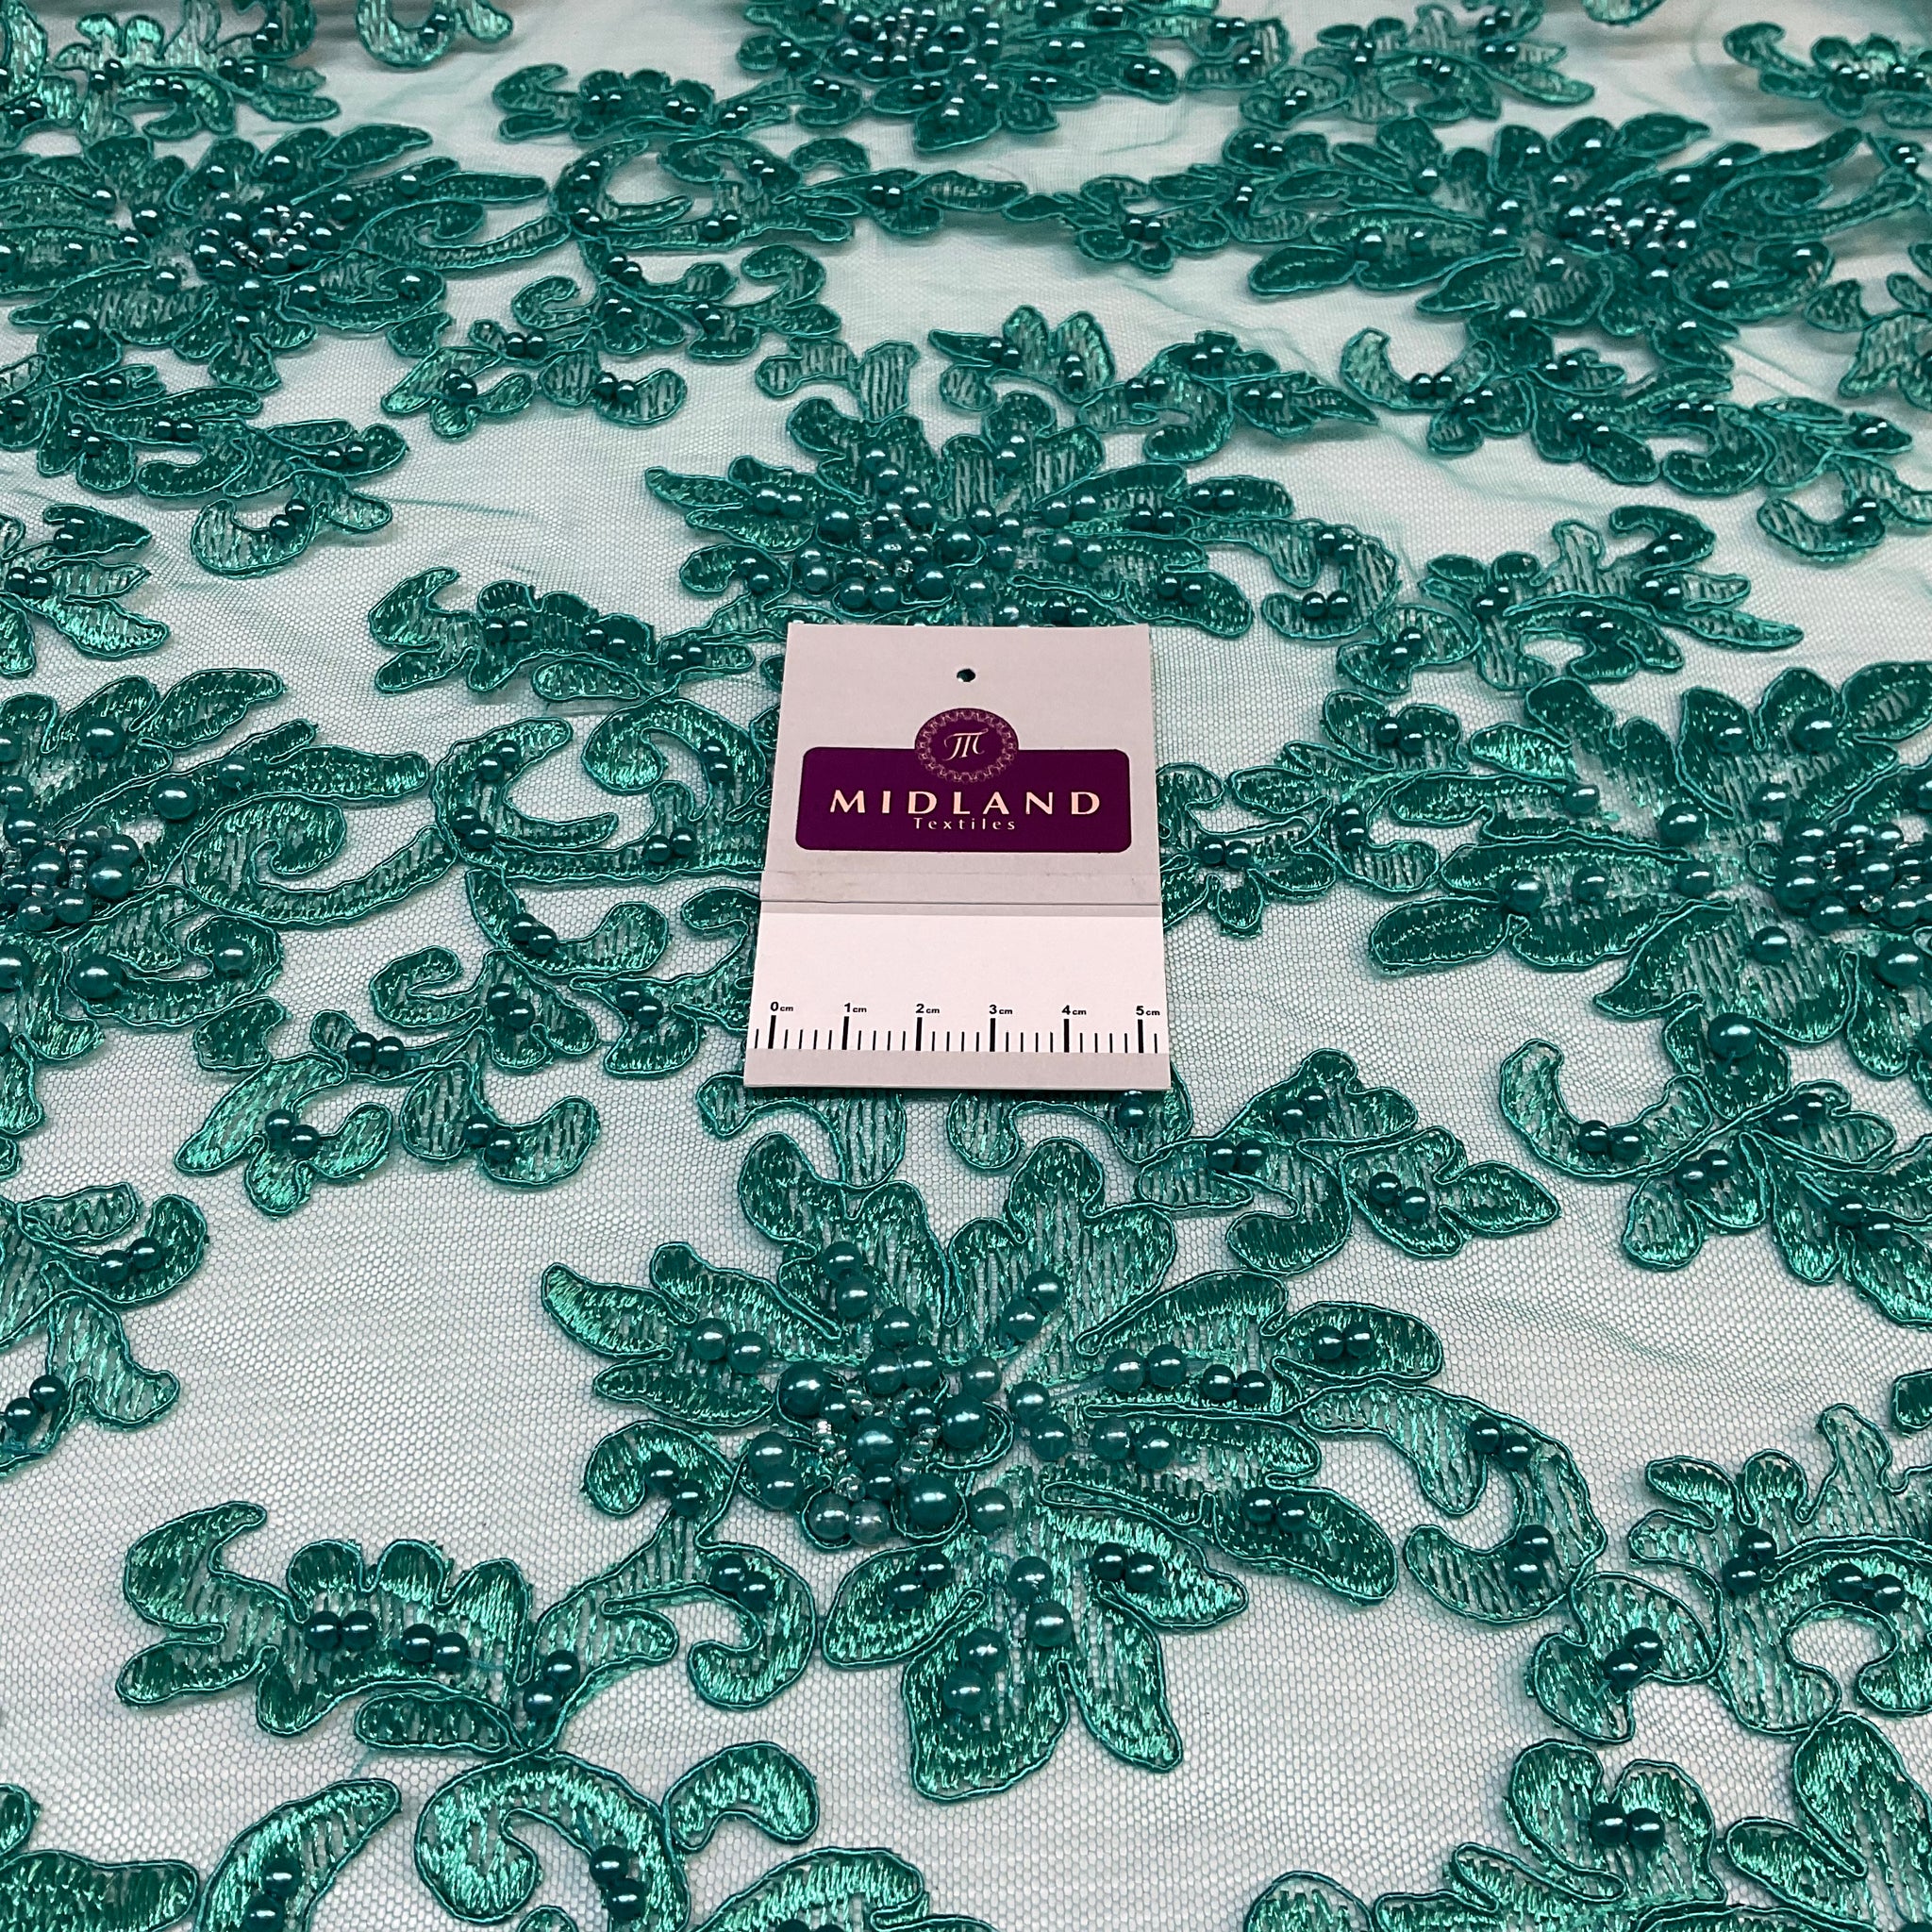 Jade green corded embroidery lace with jade faux pearls - Double scalloped border Fabric -M1400-33